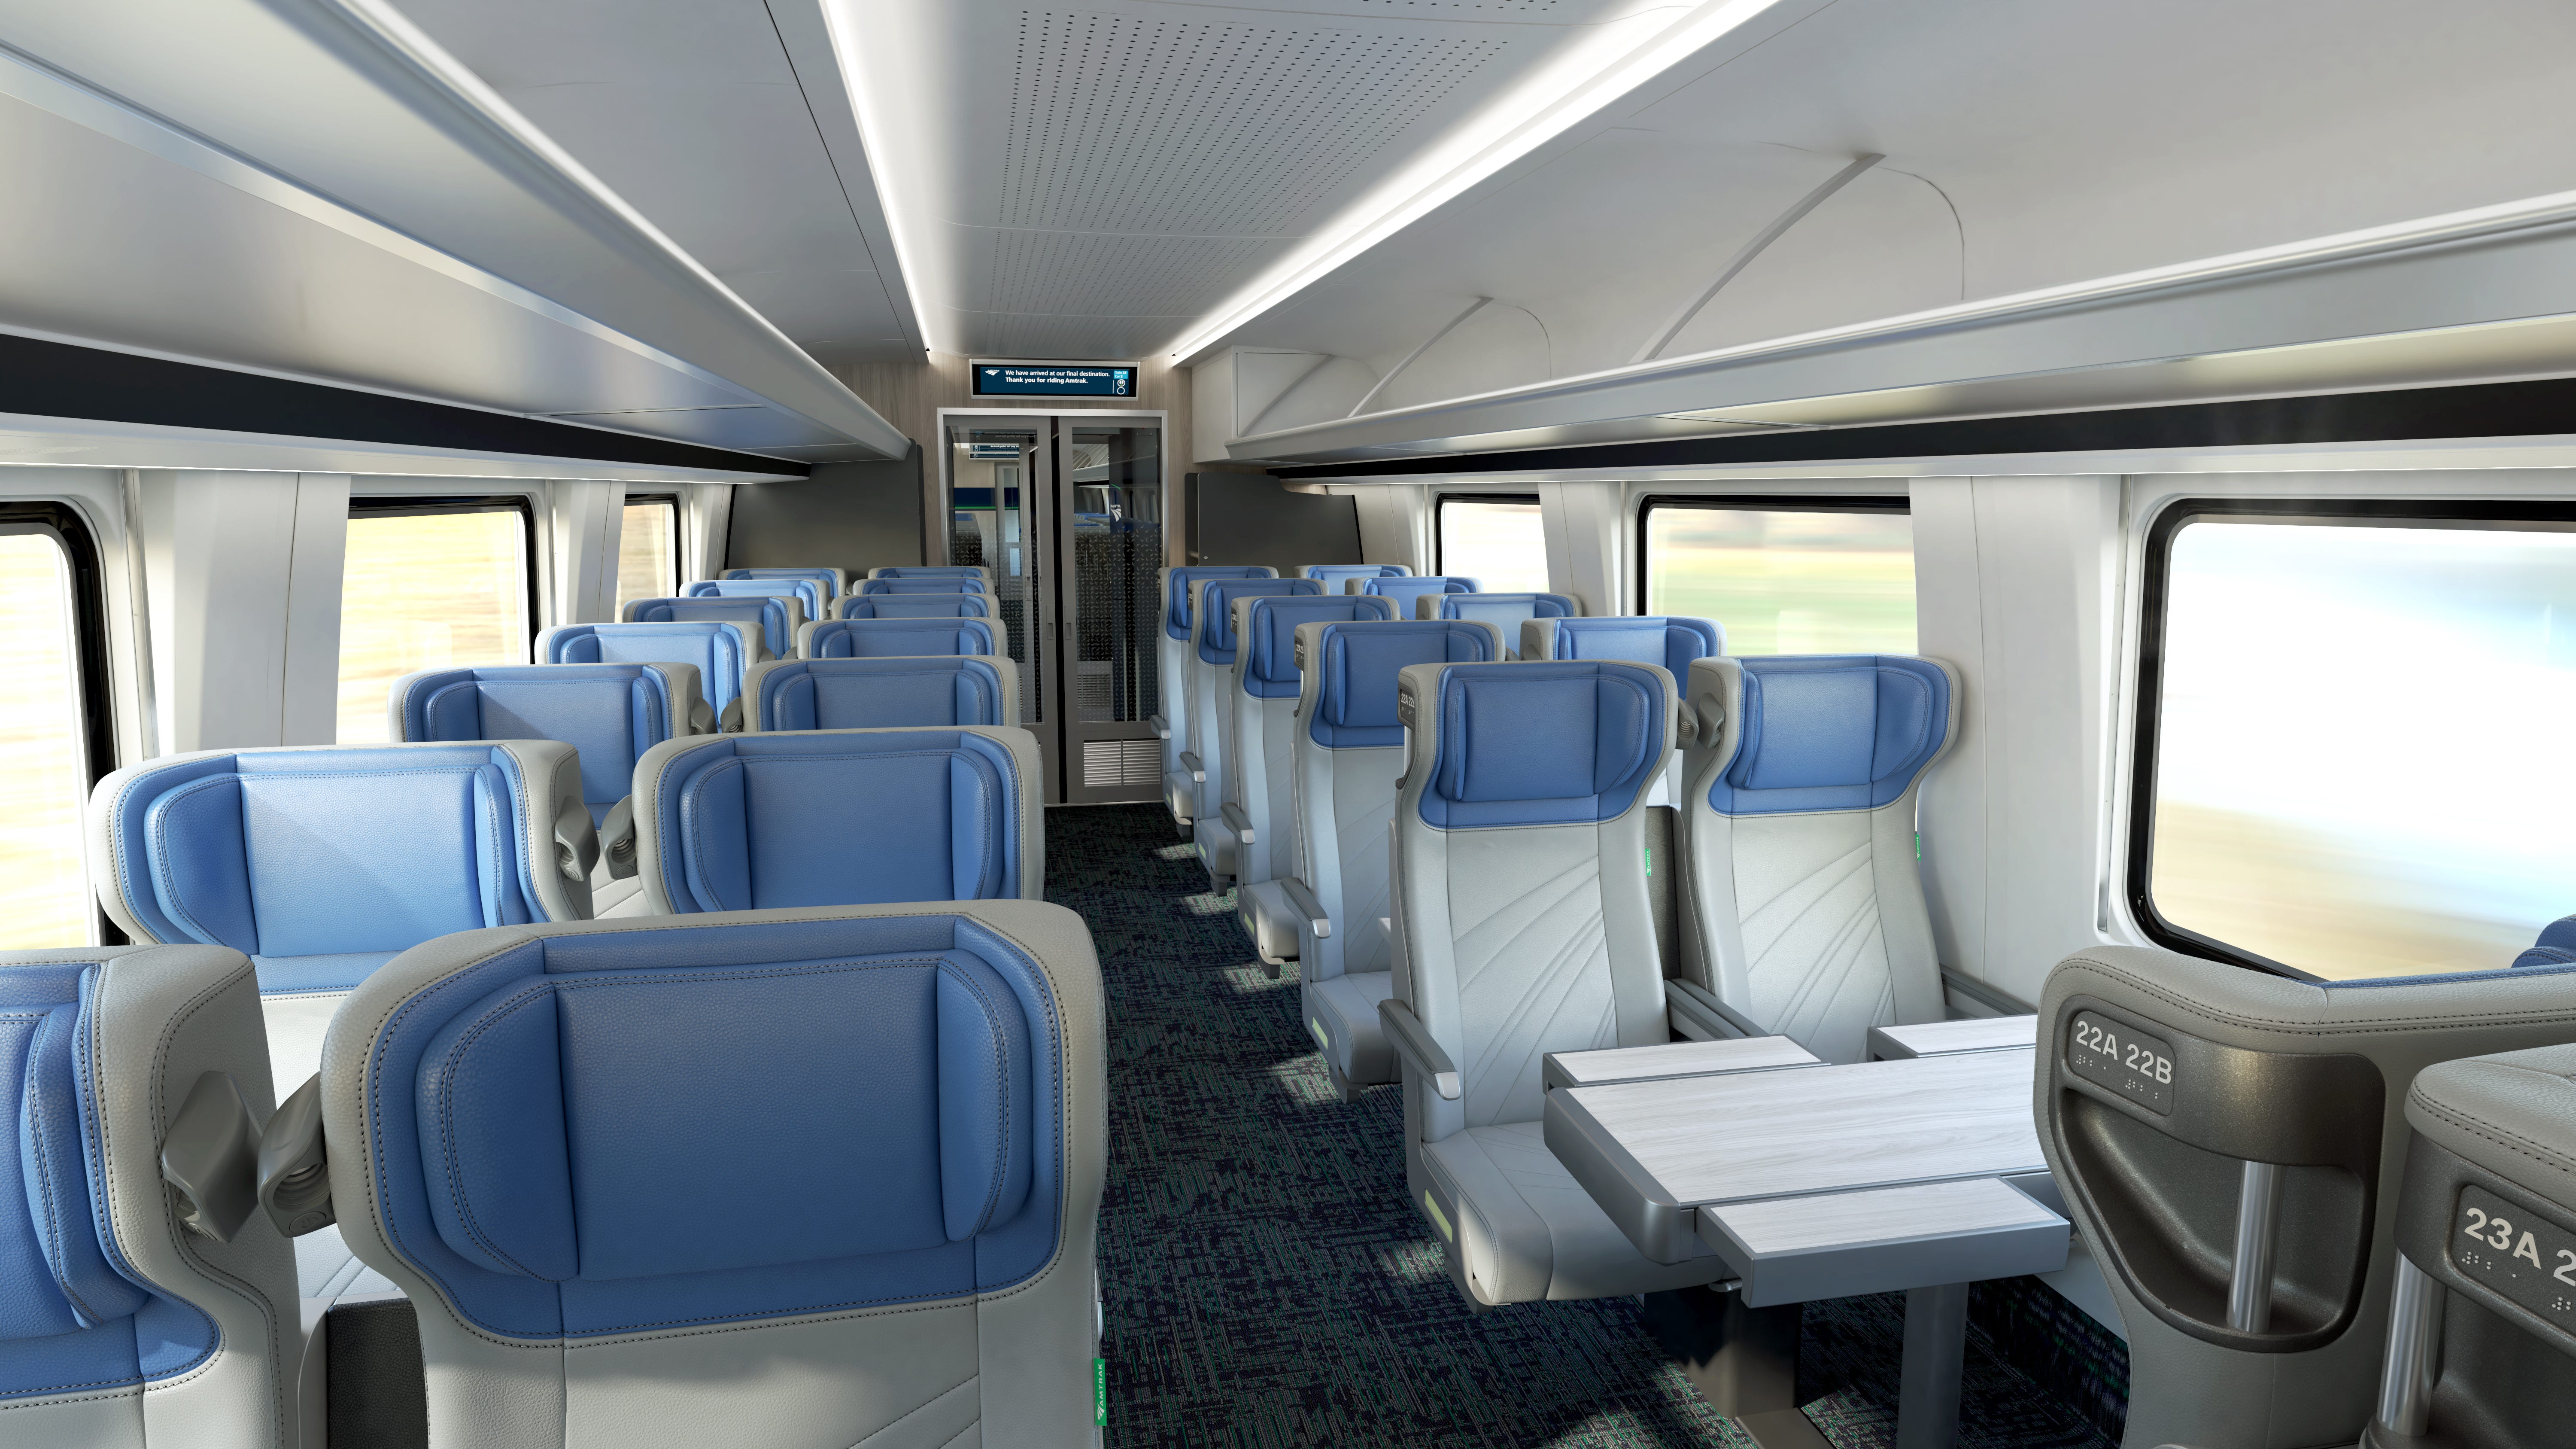 Amtrak's new coaches will roll out starting in 2026